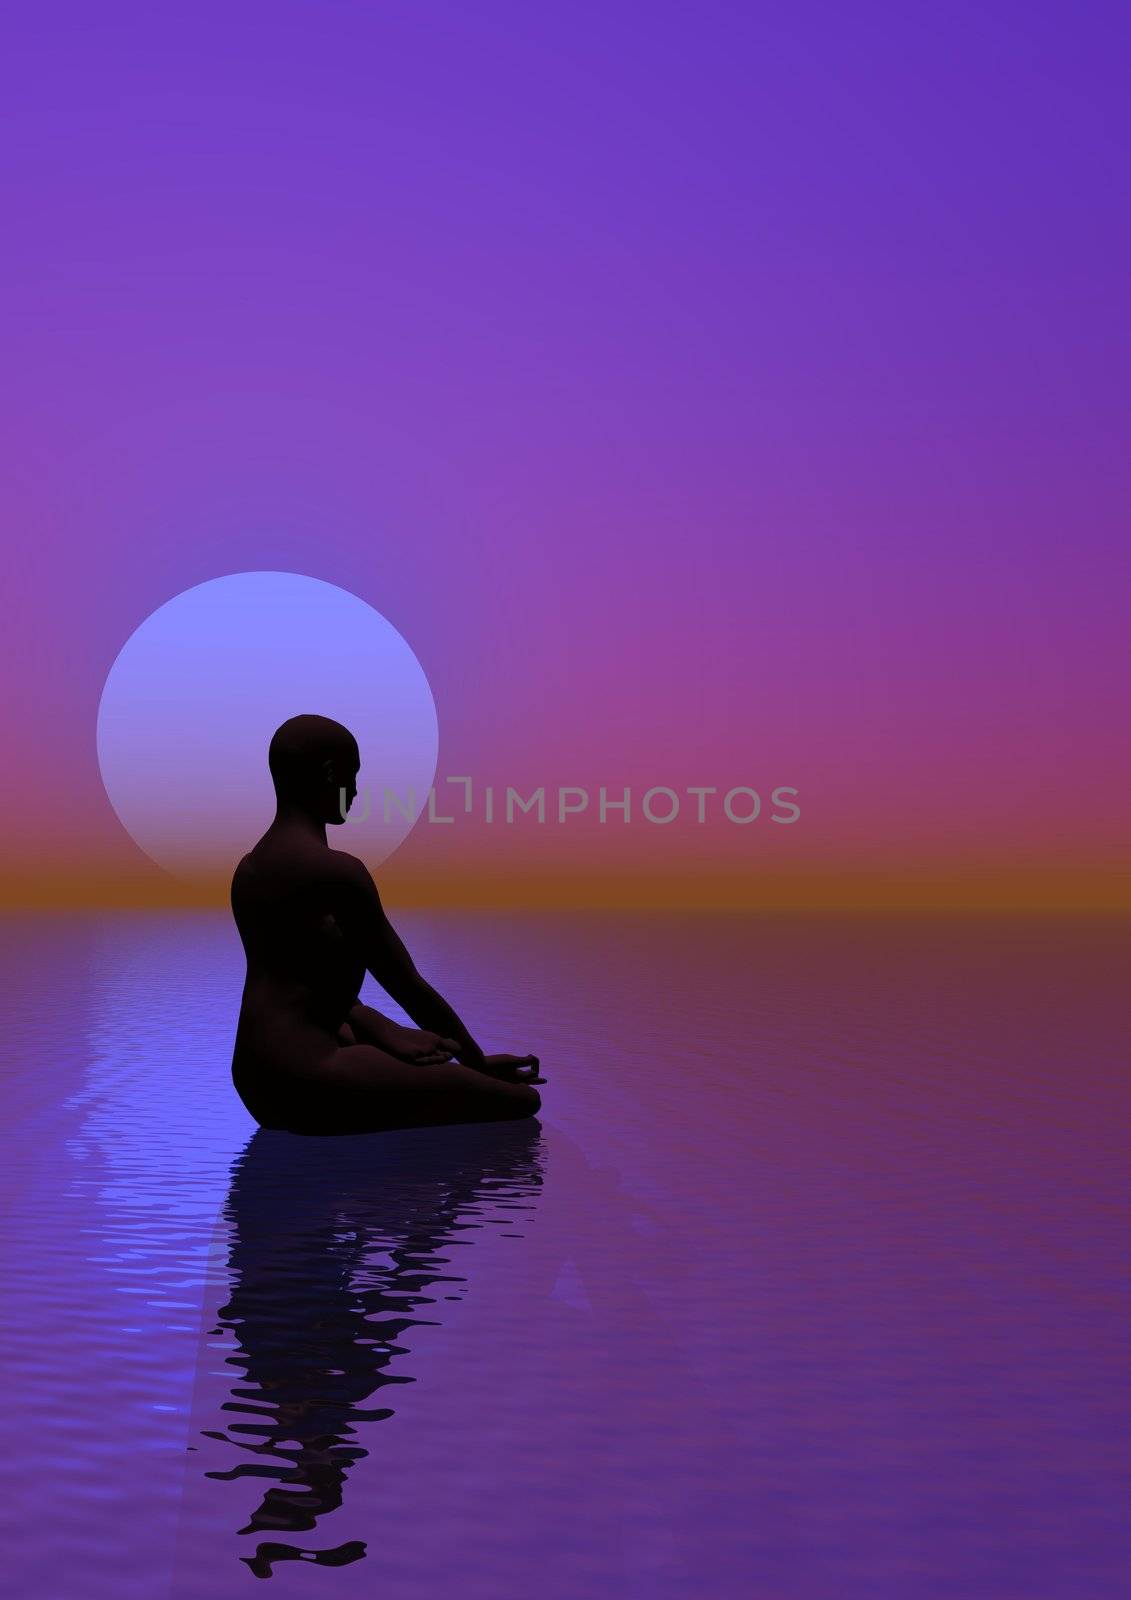 Human meditation upon ocean next to the moon by beautiful violet background light